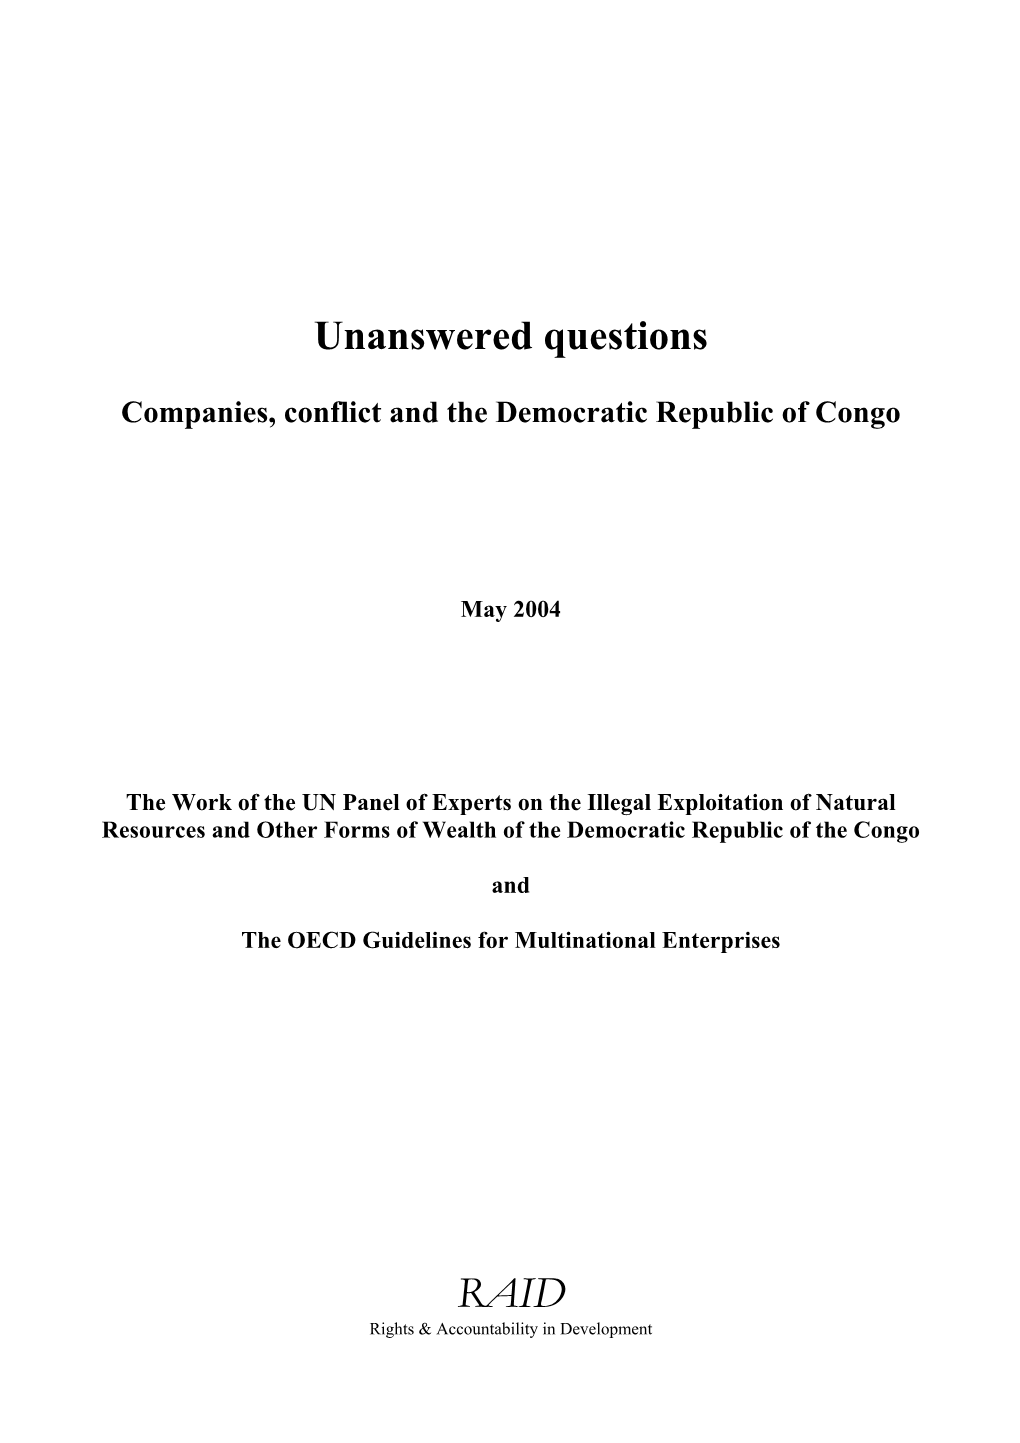 Unanswered Questions: Companies, Conflict and the Democratic Republic of Congo